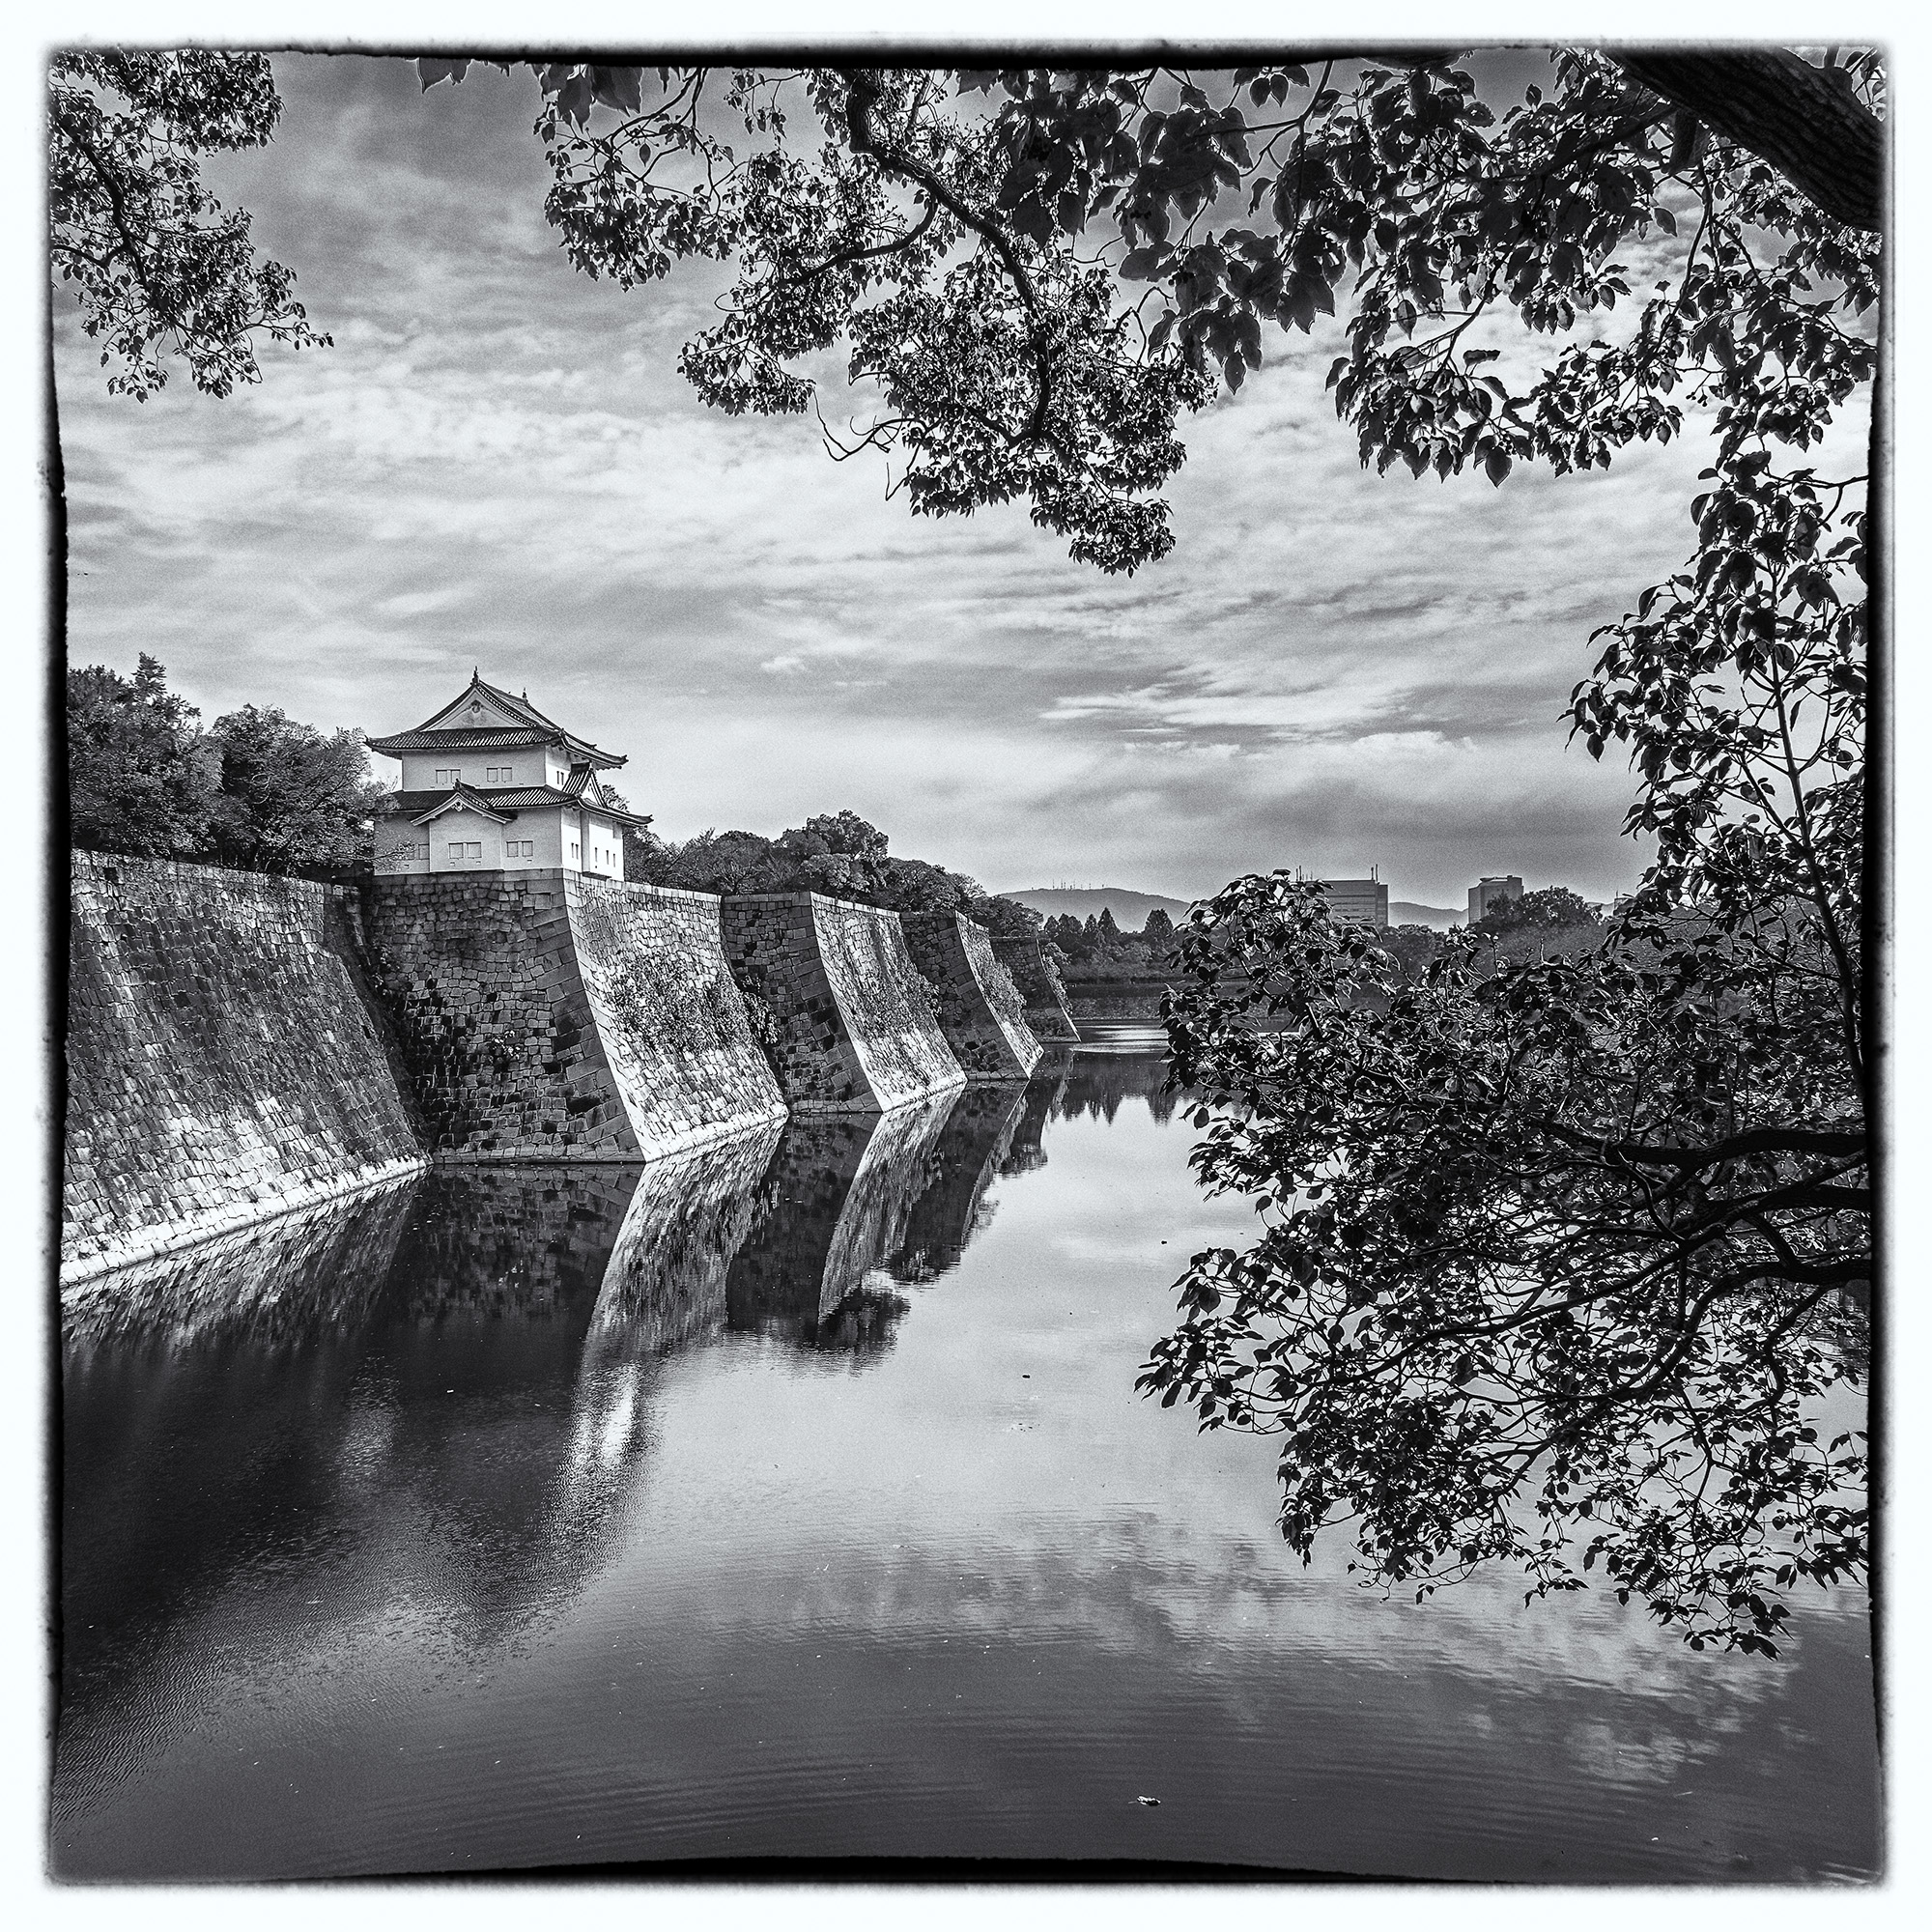 In a square frame, "Osaka Castle's Reflective Embrace" reveals an enchanting black-and-white dreamscape. A guard tower, nestled...